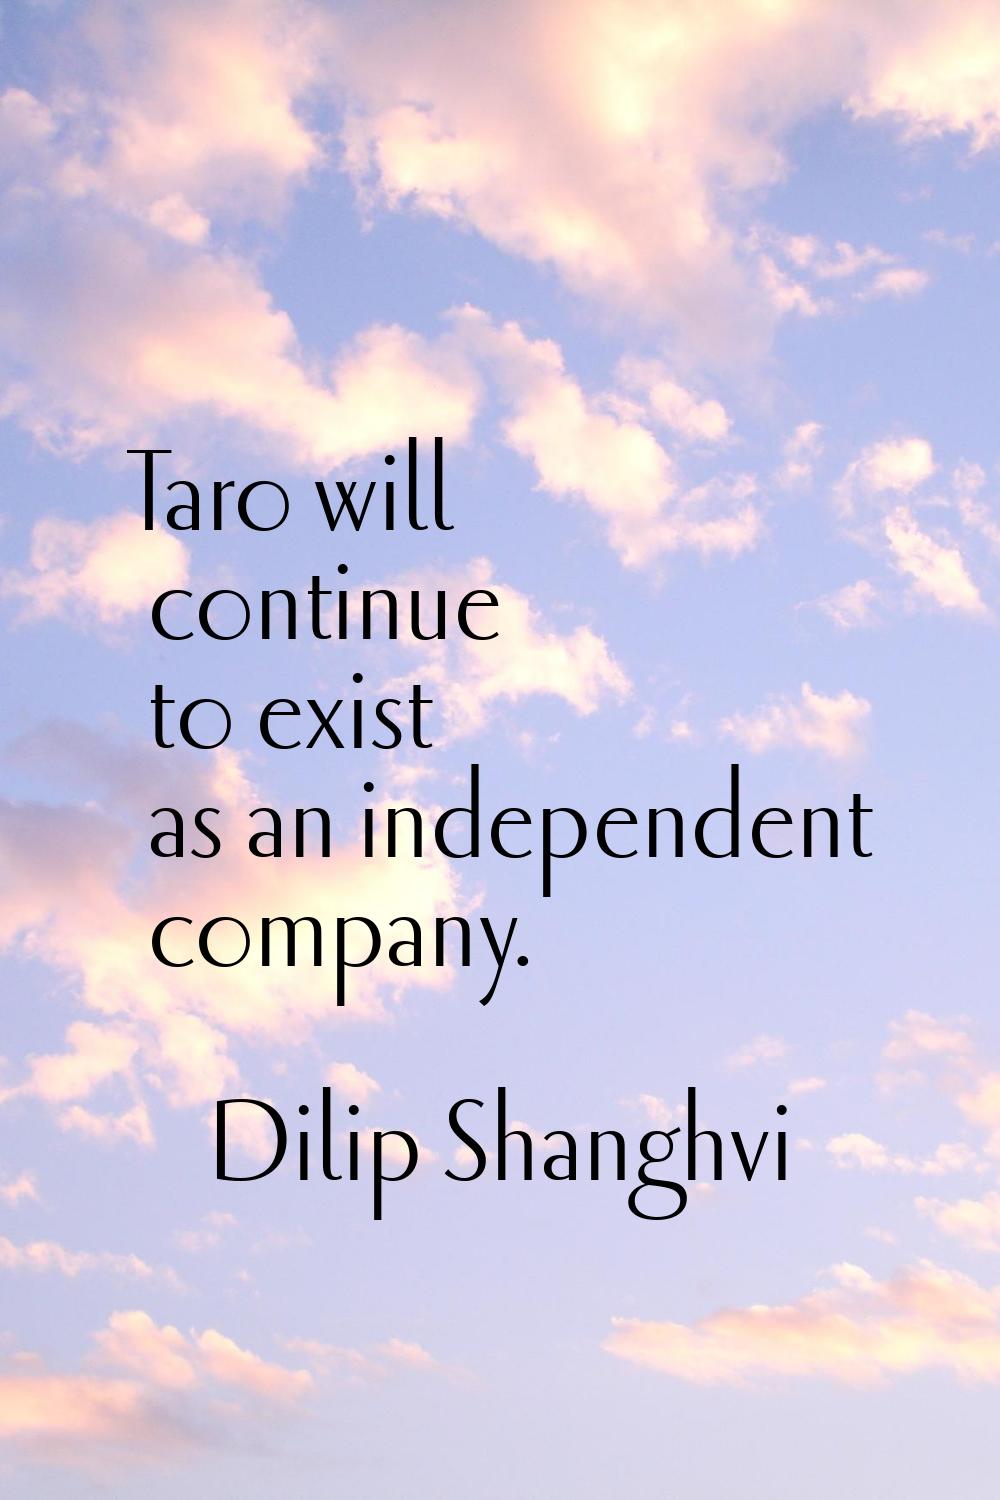 Taro will continue to exist as an independent company.